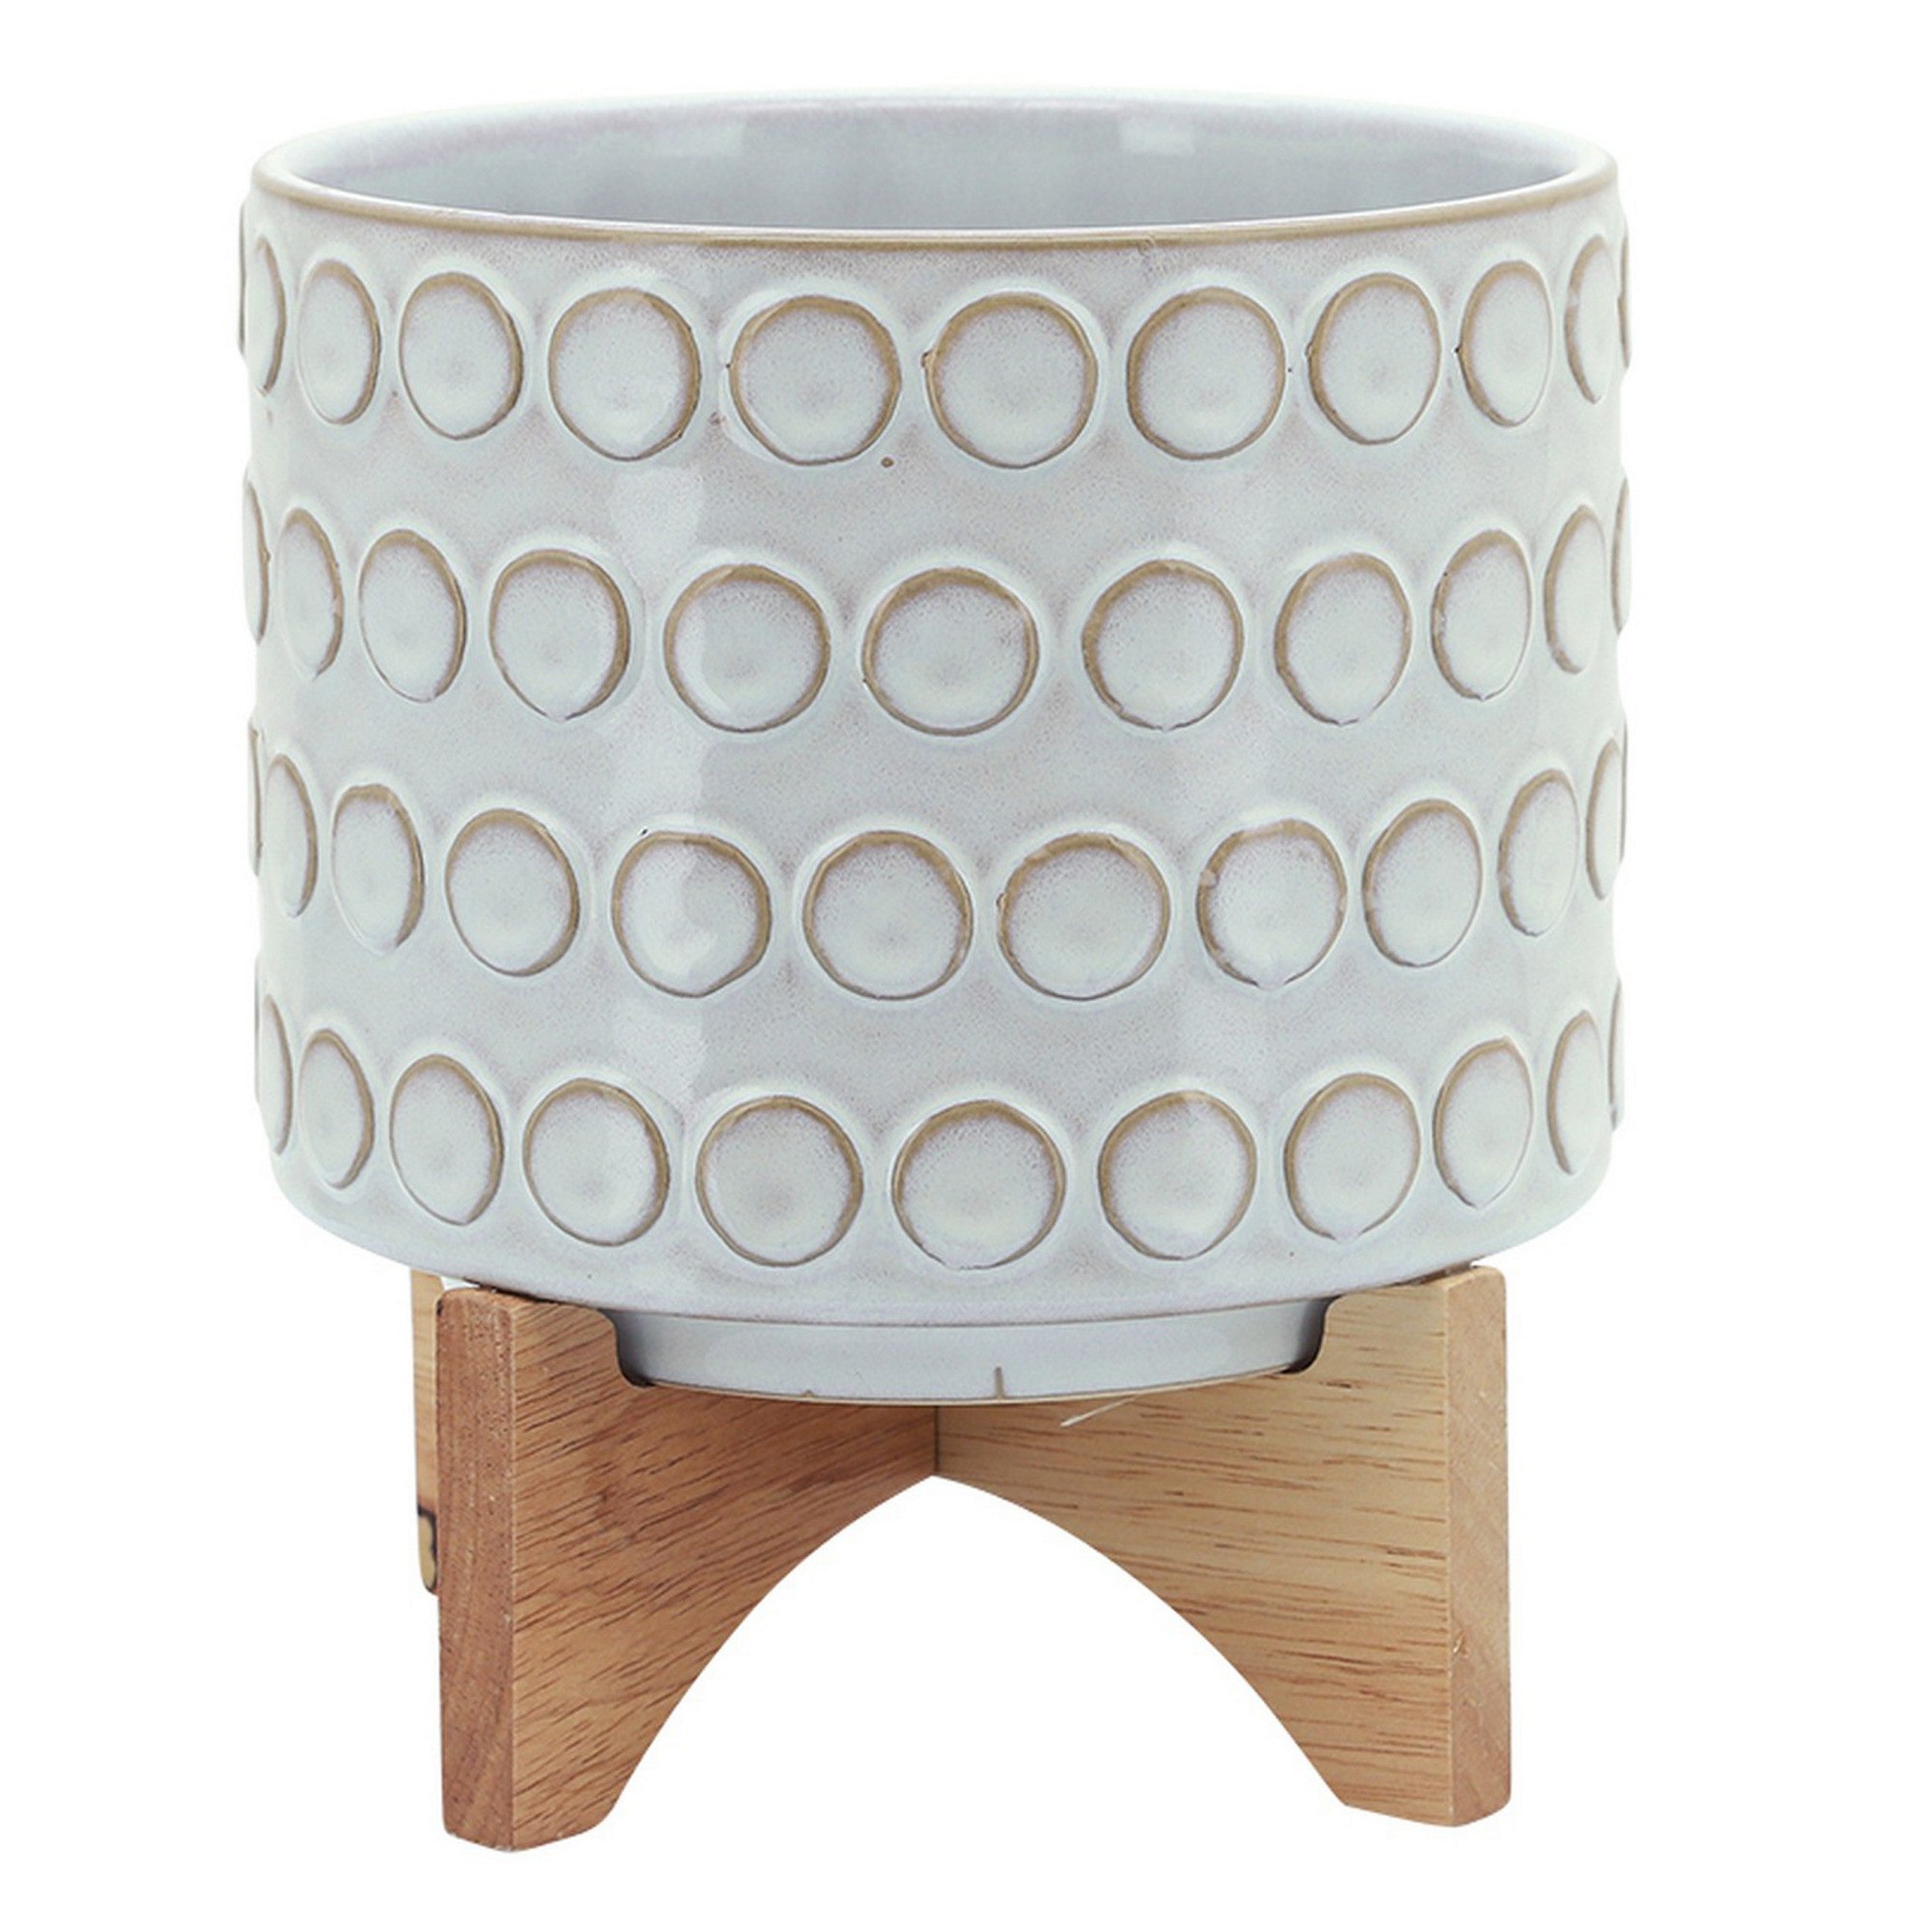 Planter-with-Wooden-Stand-and-Bubble-Design,-Small,-Off-White-Pots-&-Planters